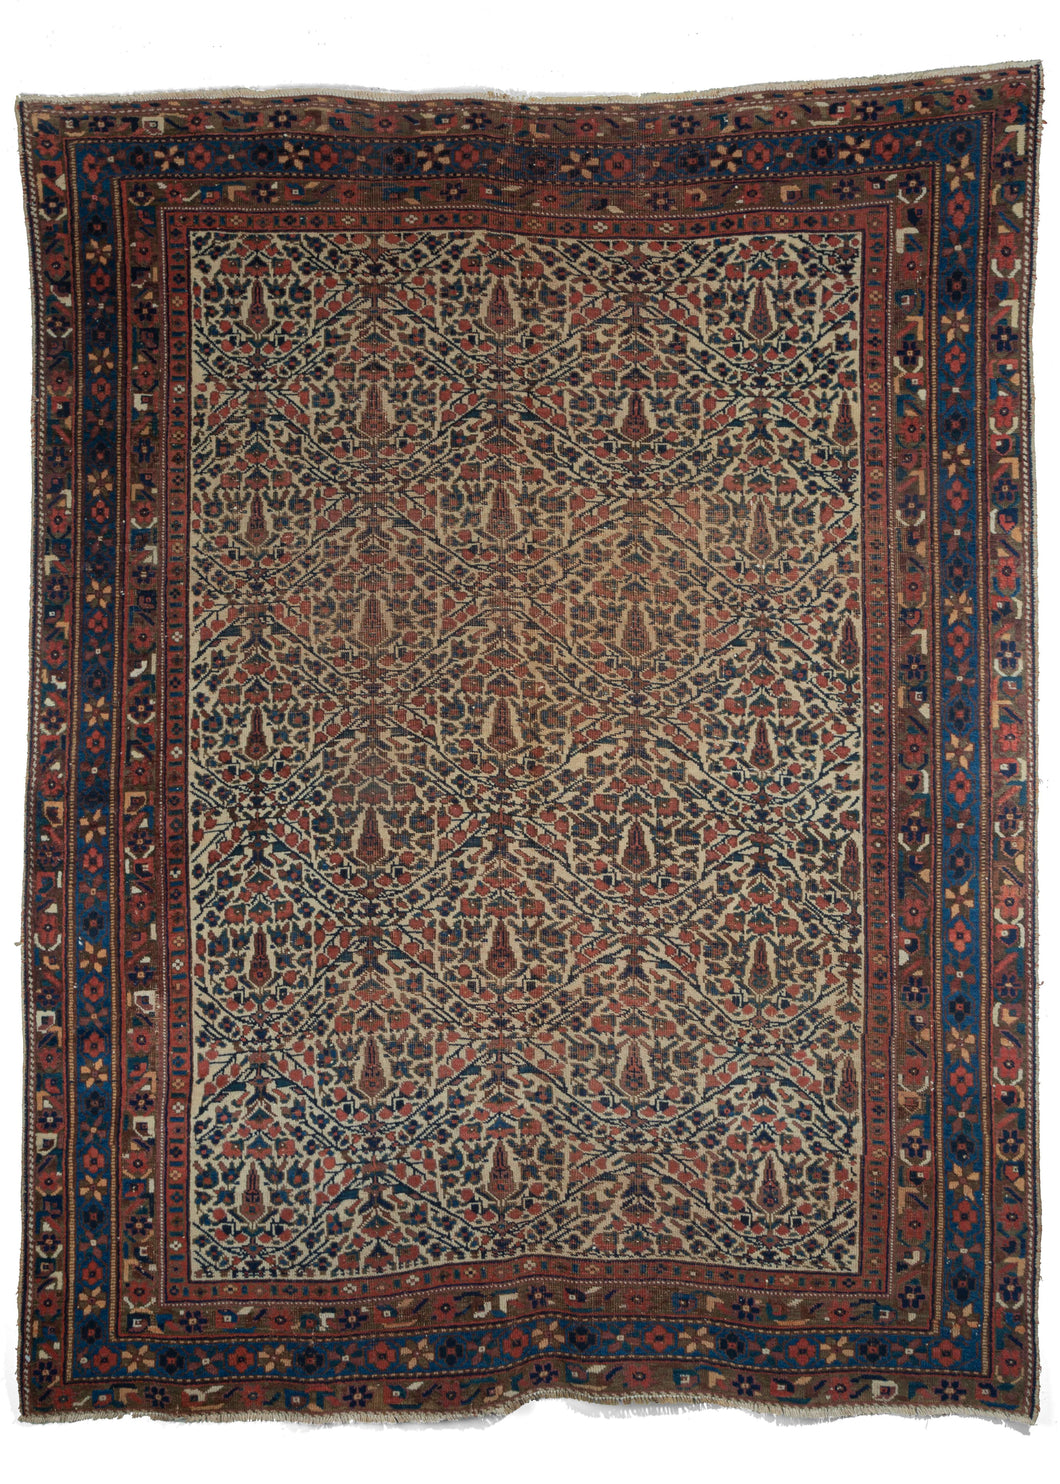 Persian Afshar handwoven in Southwest Iran during early 20th century. Indigo, pink, purple and ivory. Intricate geometric flower pattern framed by four elegant borders. 